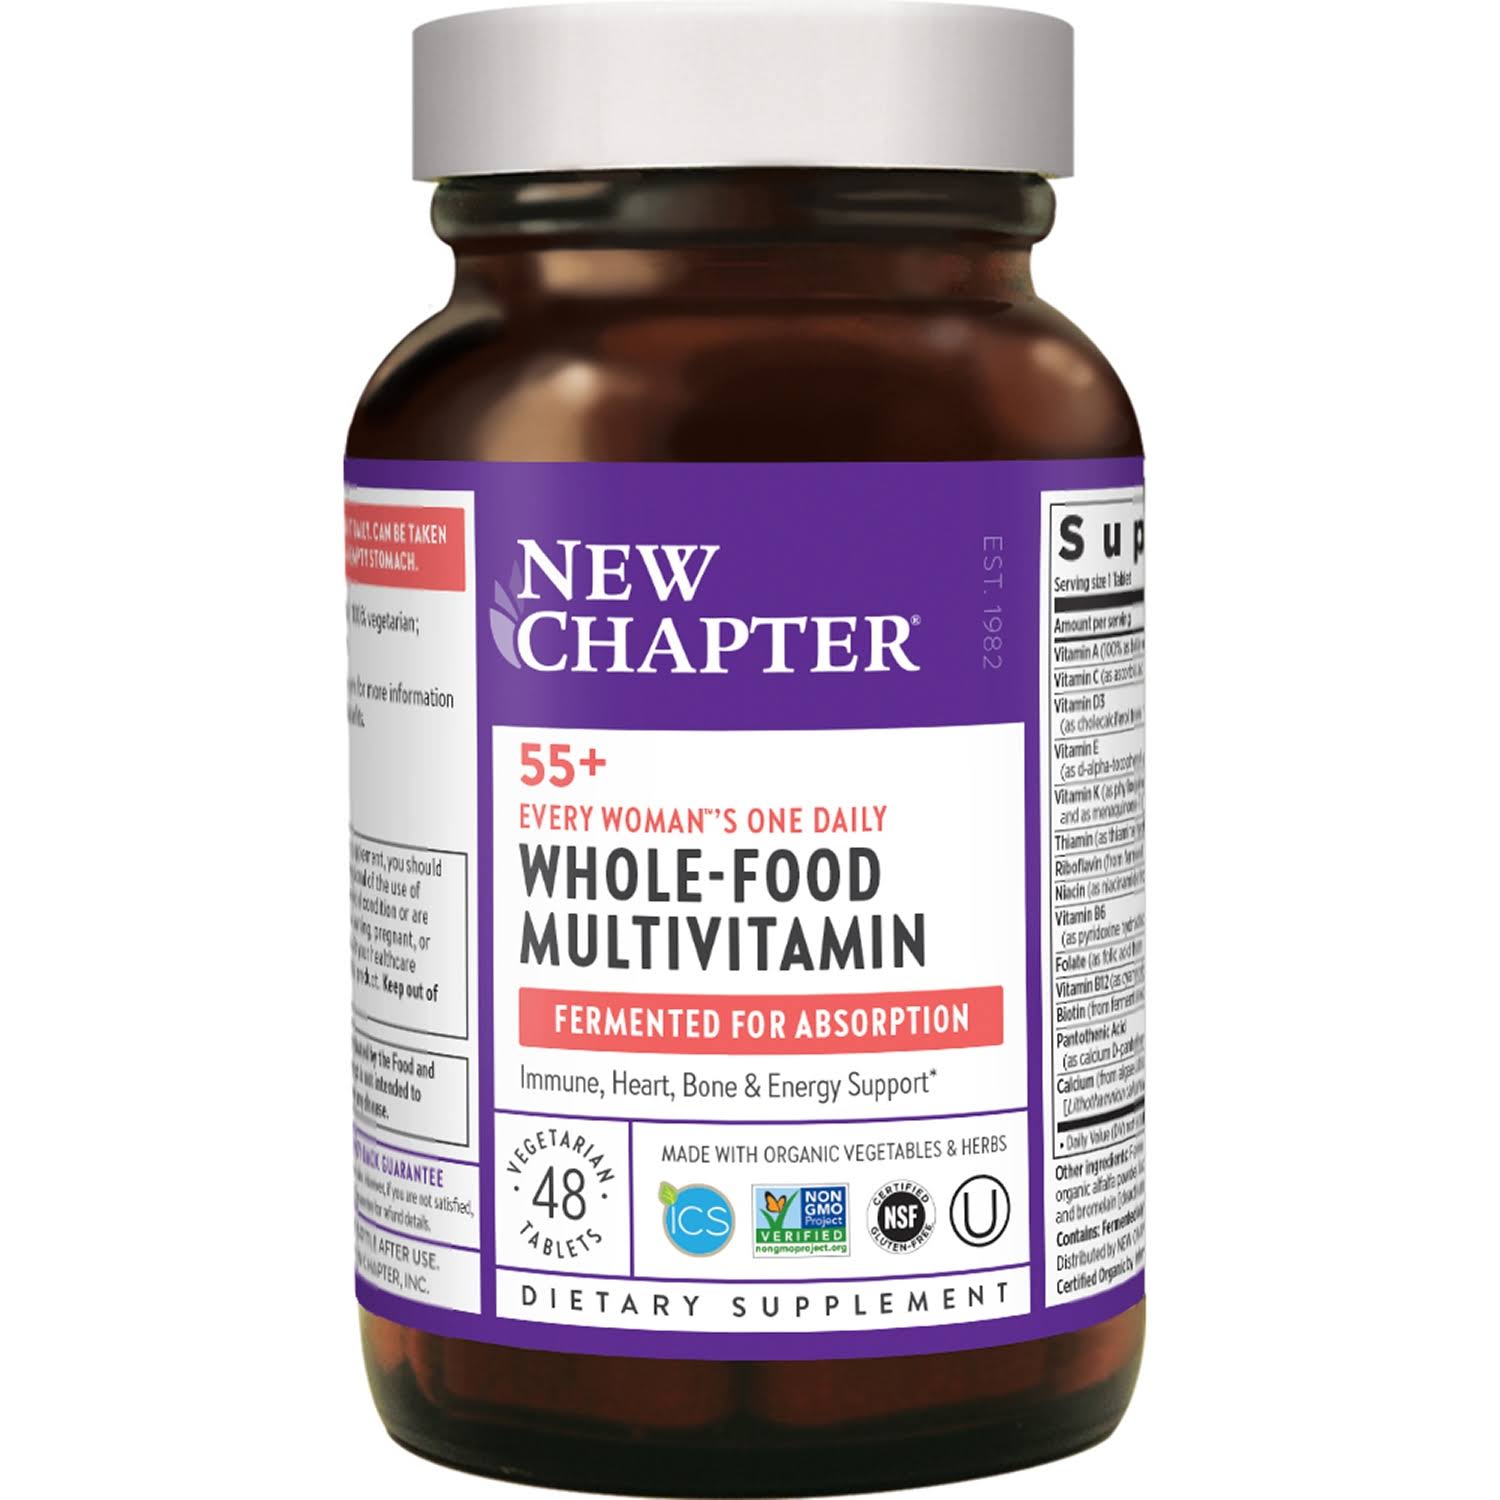 New Chapter Whole-Food Multivitamin, 55+ Every Woman's One Daily, Vegetarian Tablets - 48 tablets